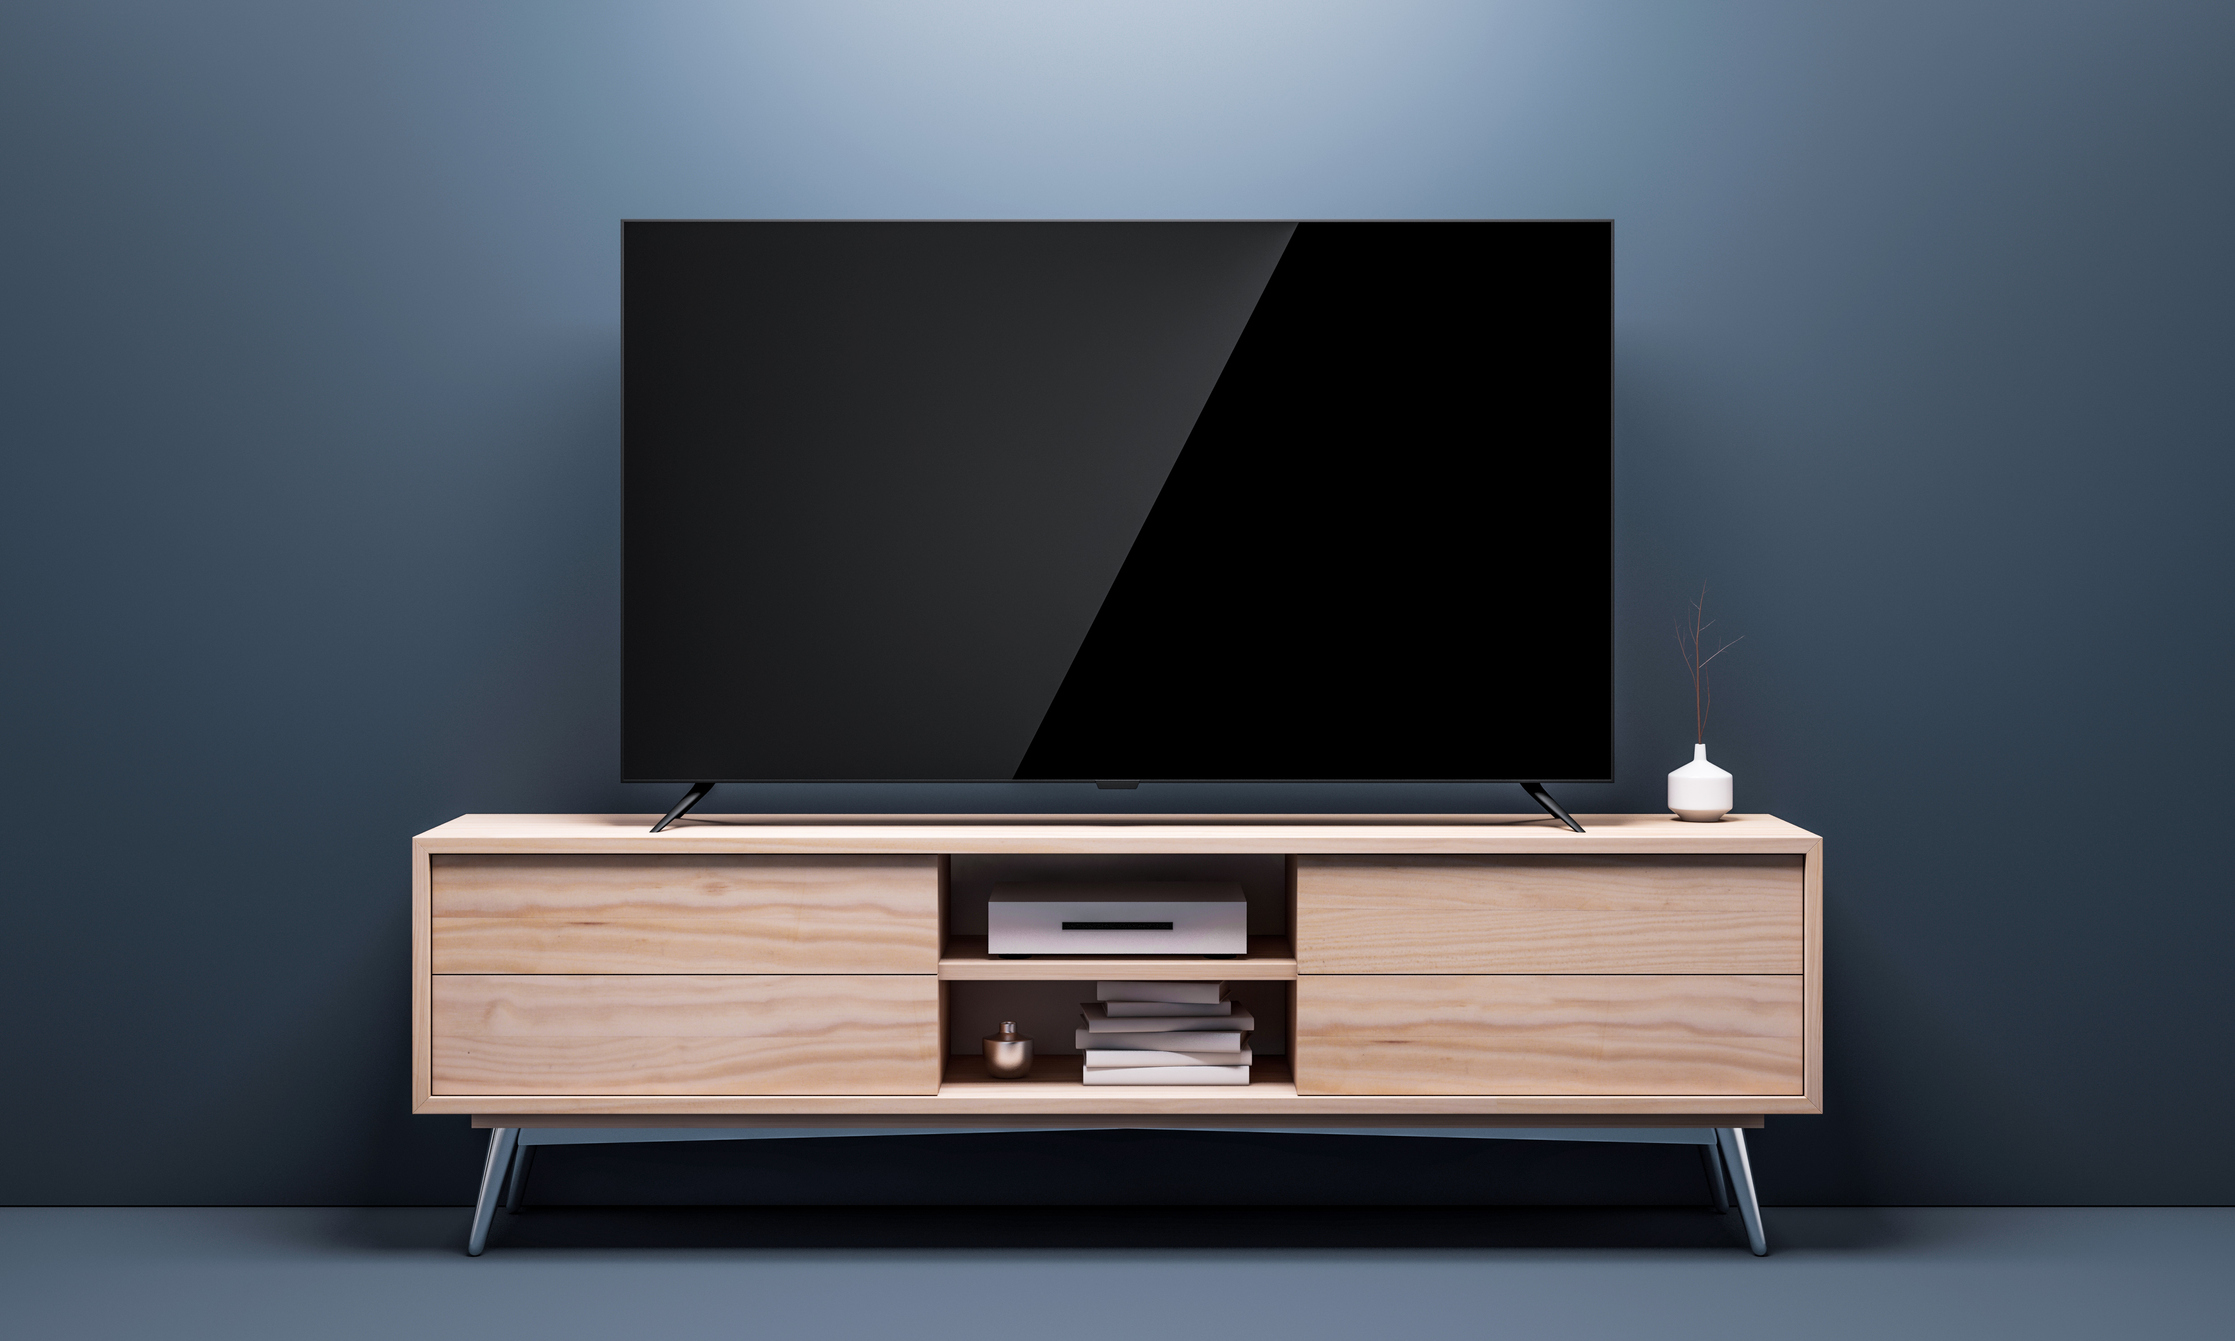 Smart Tv Mockup with black glossy screen on console in living room